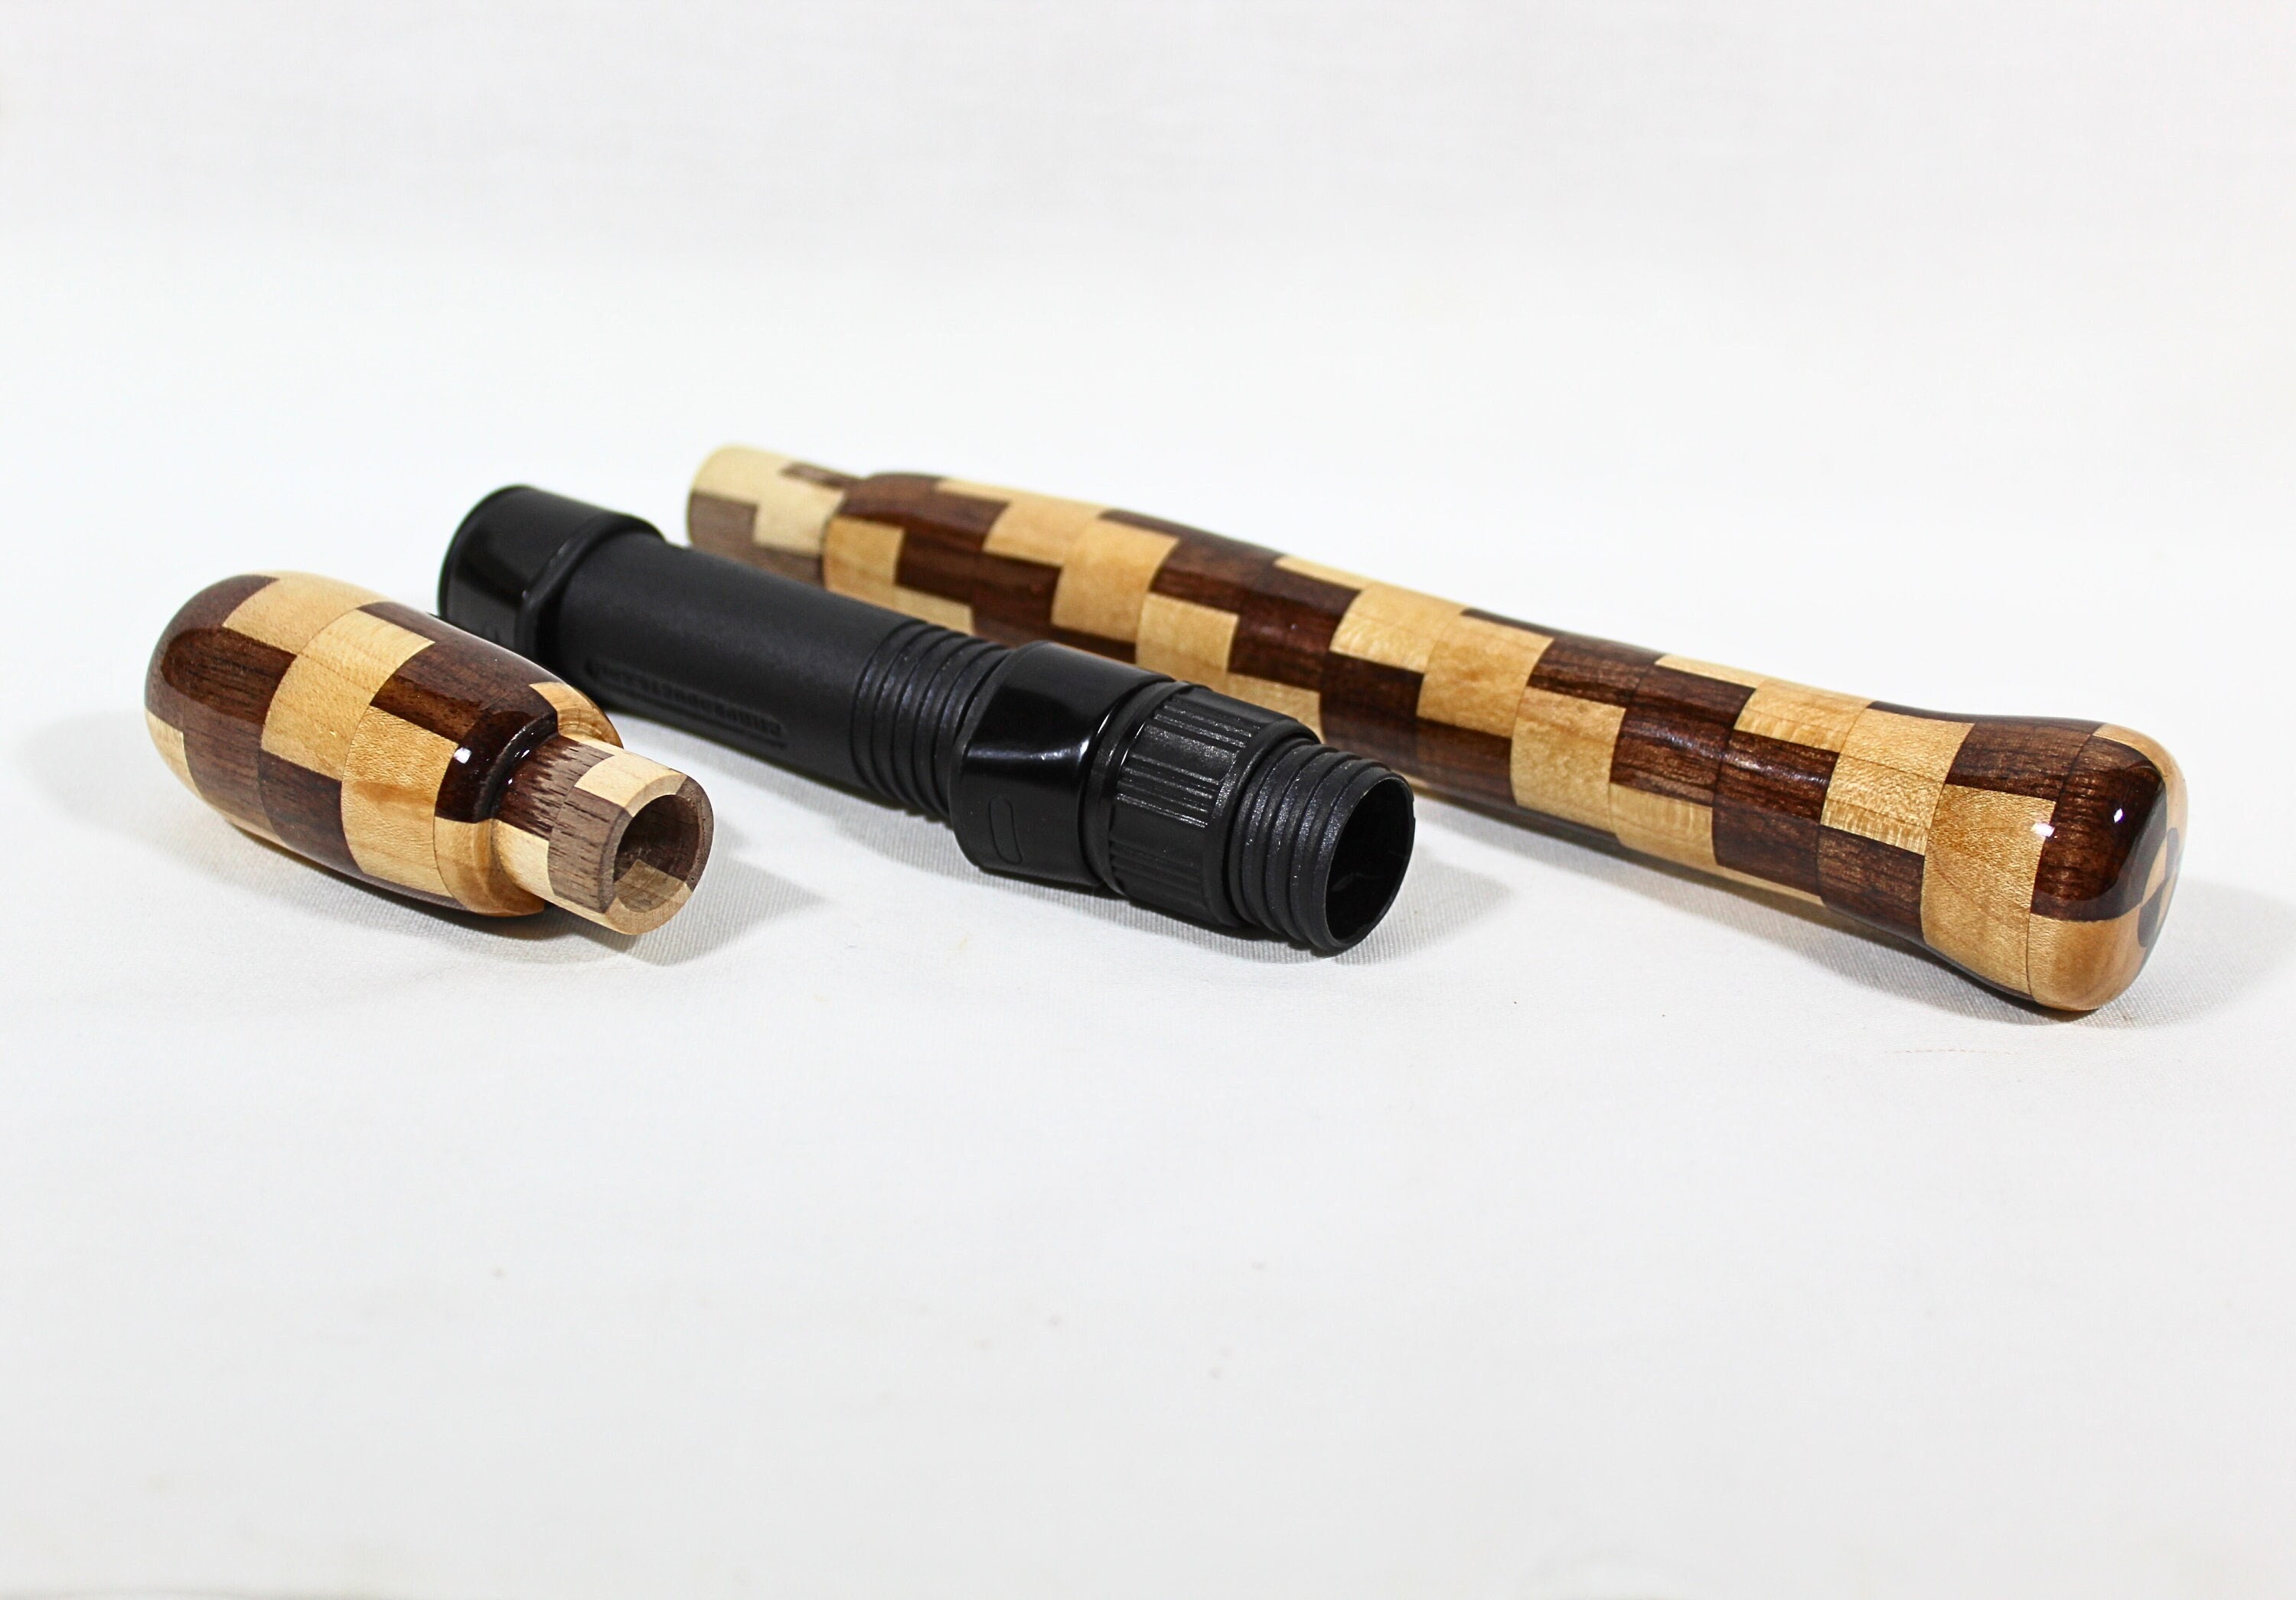 Custom Built Fishing Rod Handle, Spinning Rod Made of Walnut and Maple Wood,  Handmade and Lathe Turned, Epoxy Coated, One-of-a-kind 